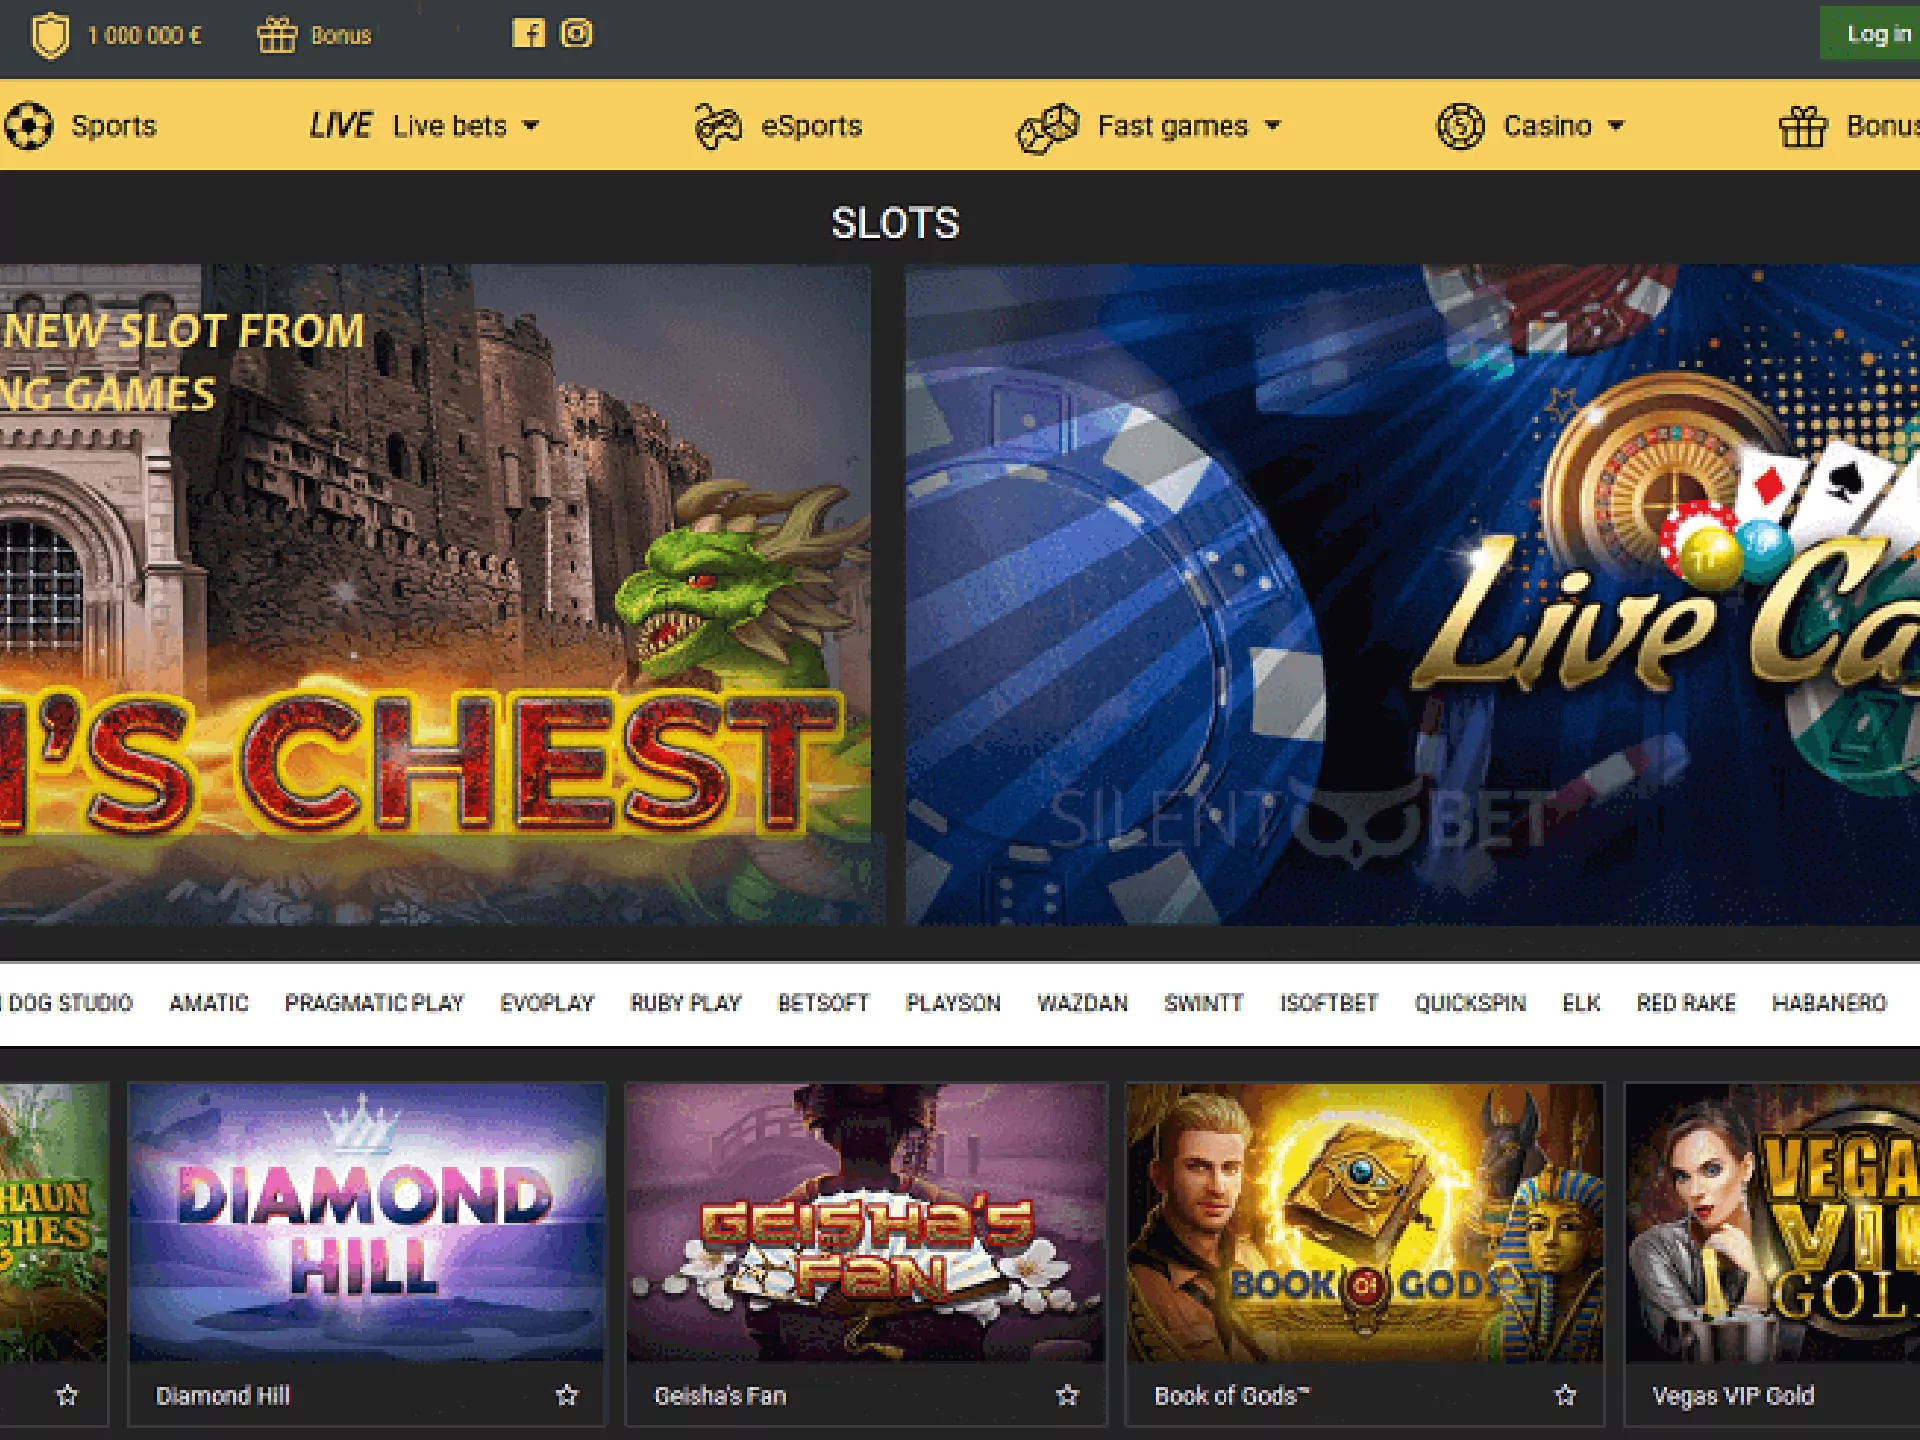 You can play in casino Melbet online.